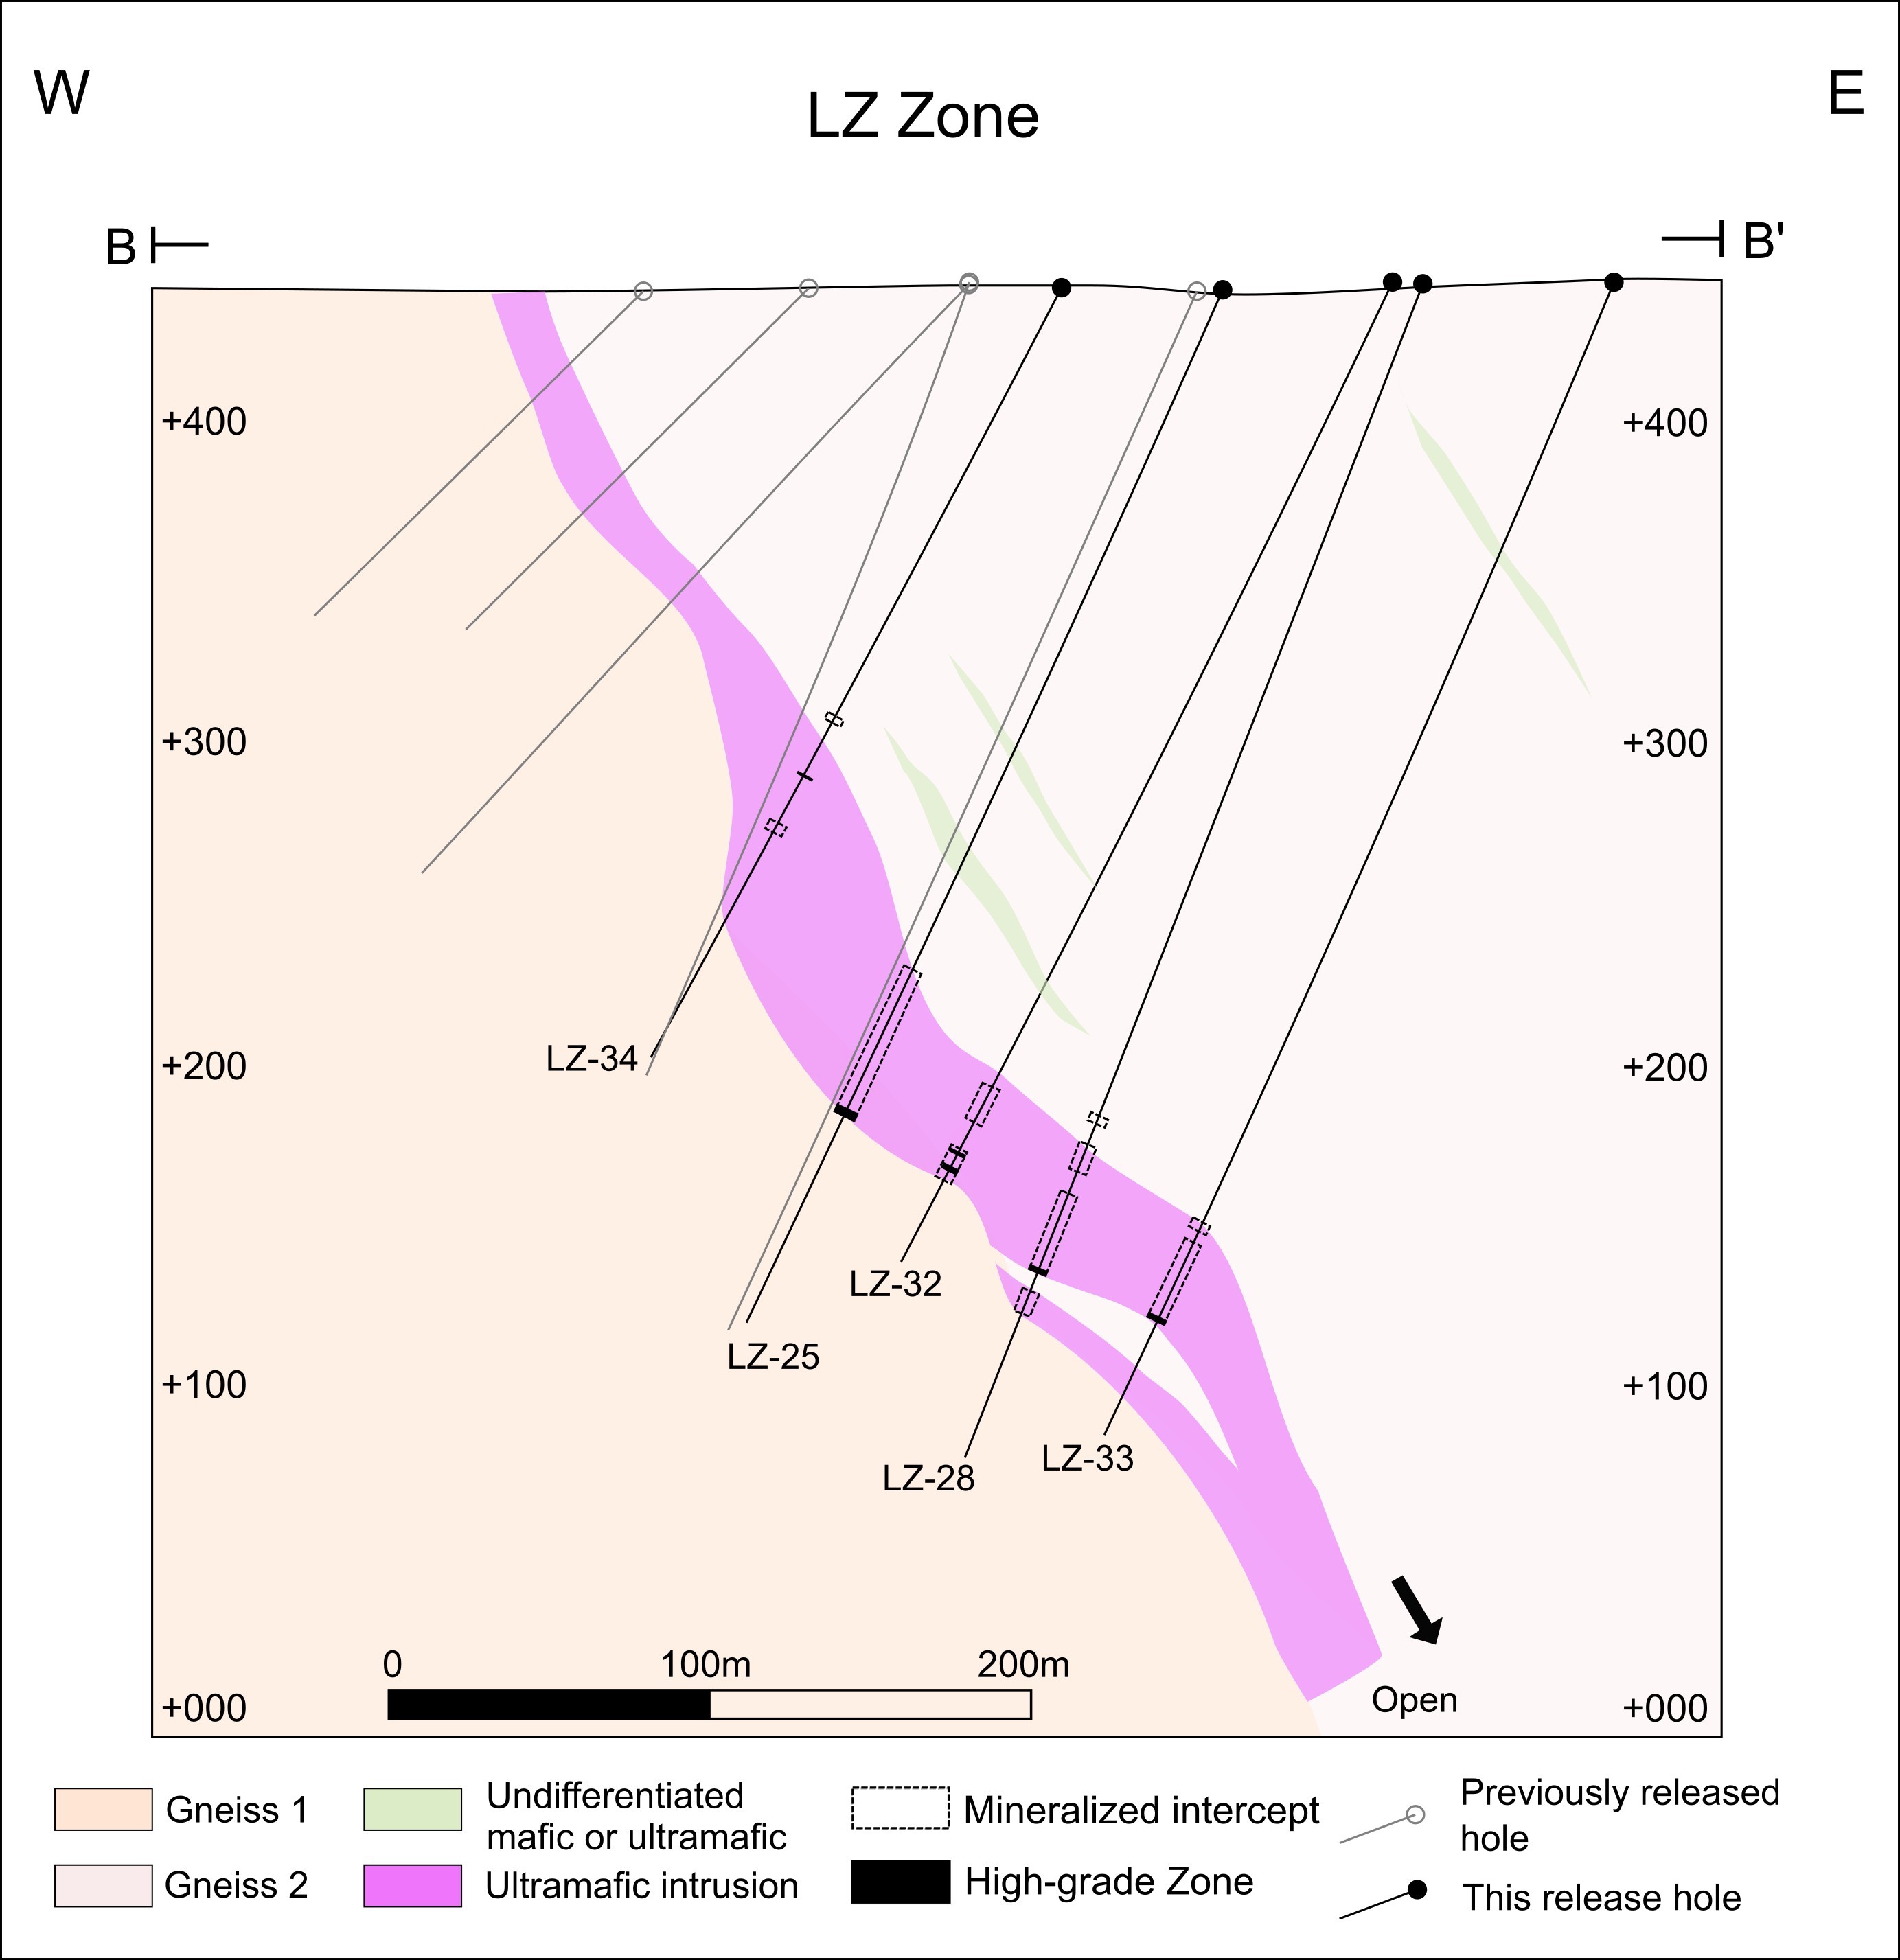 LZ Zone - East-West Composite Section